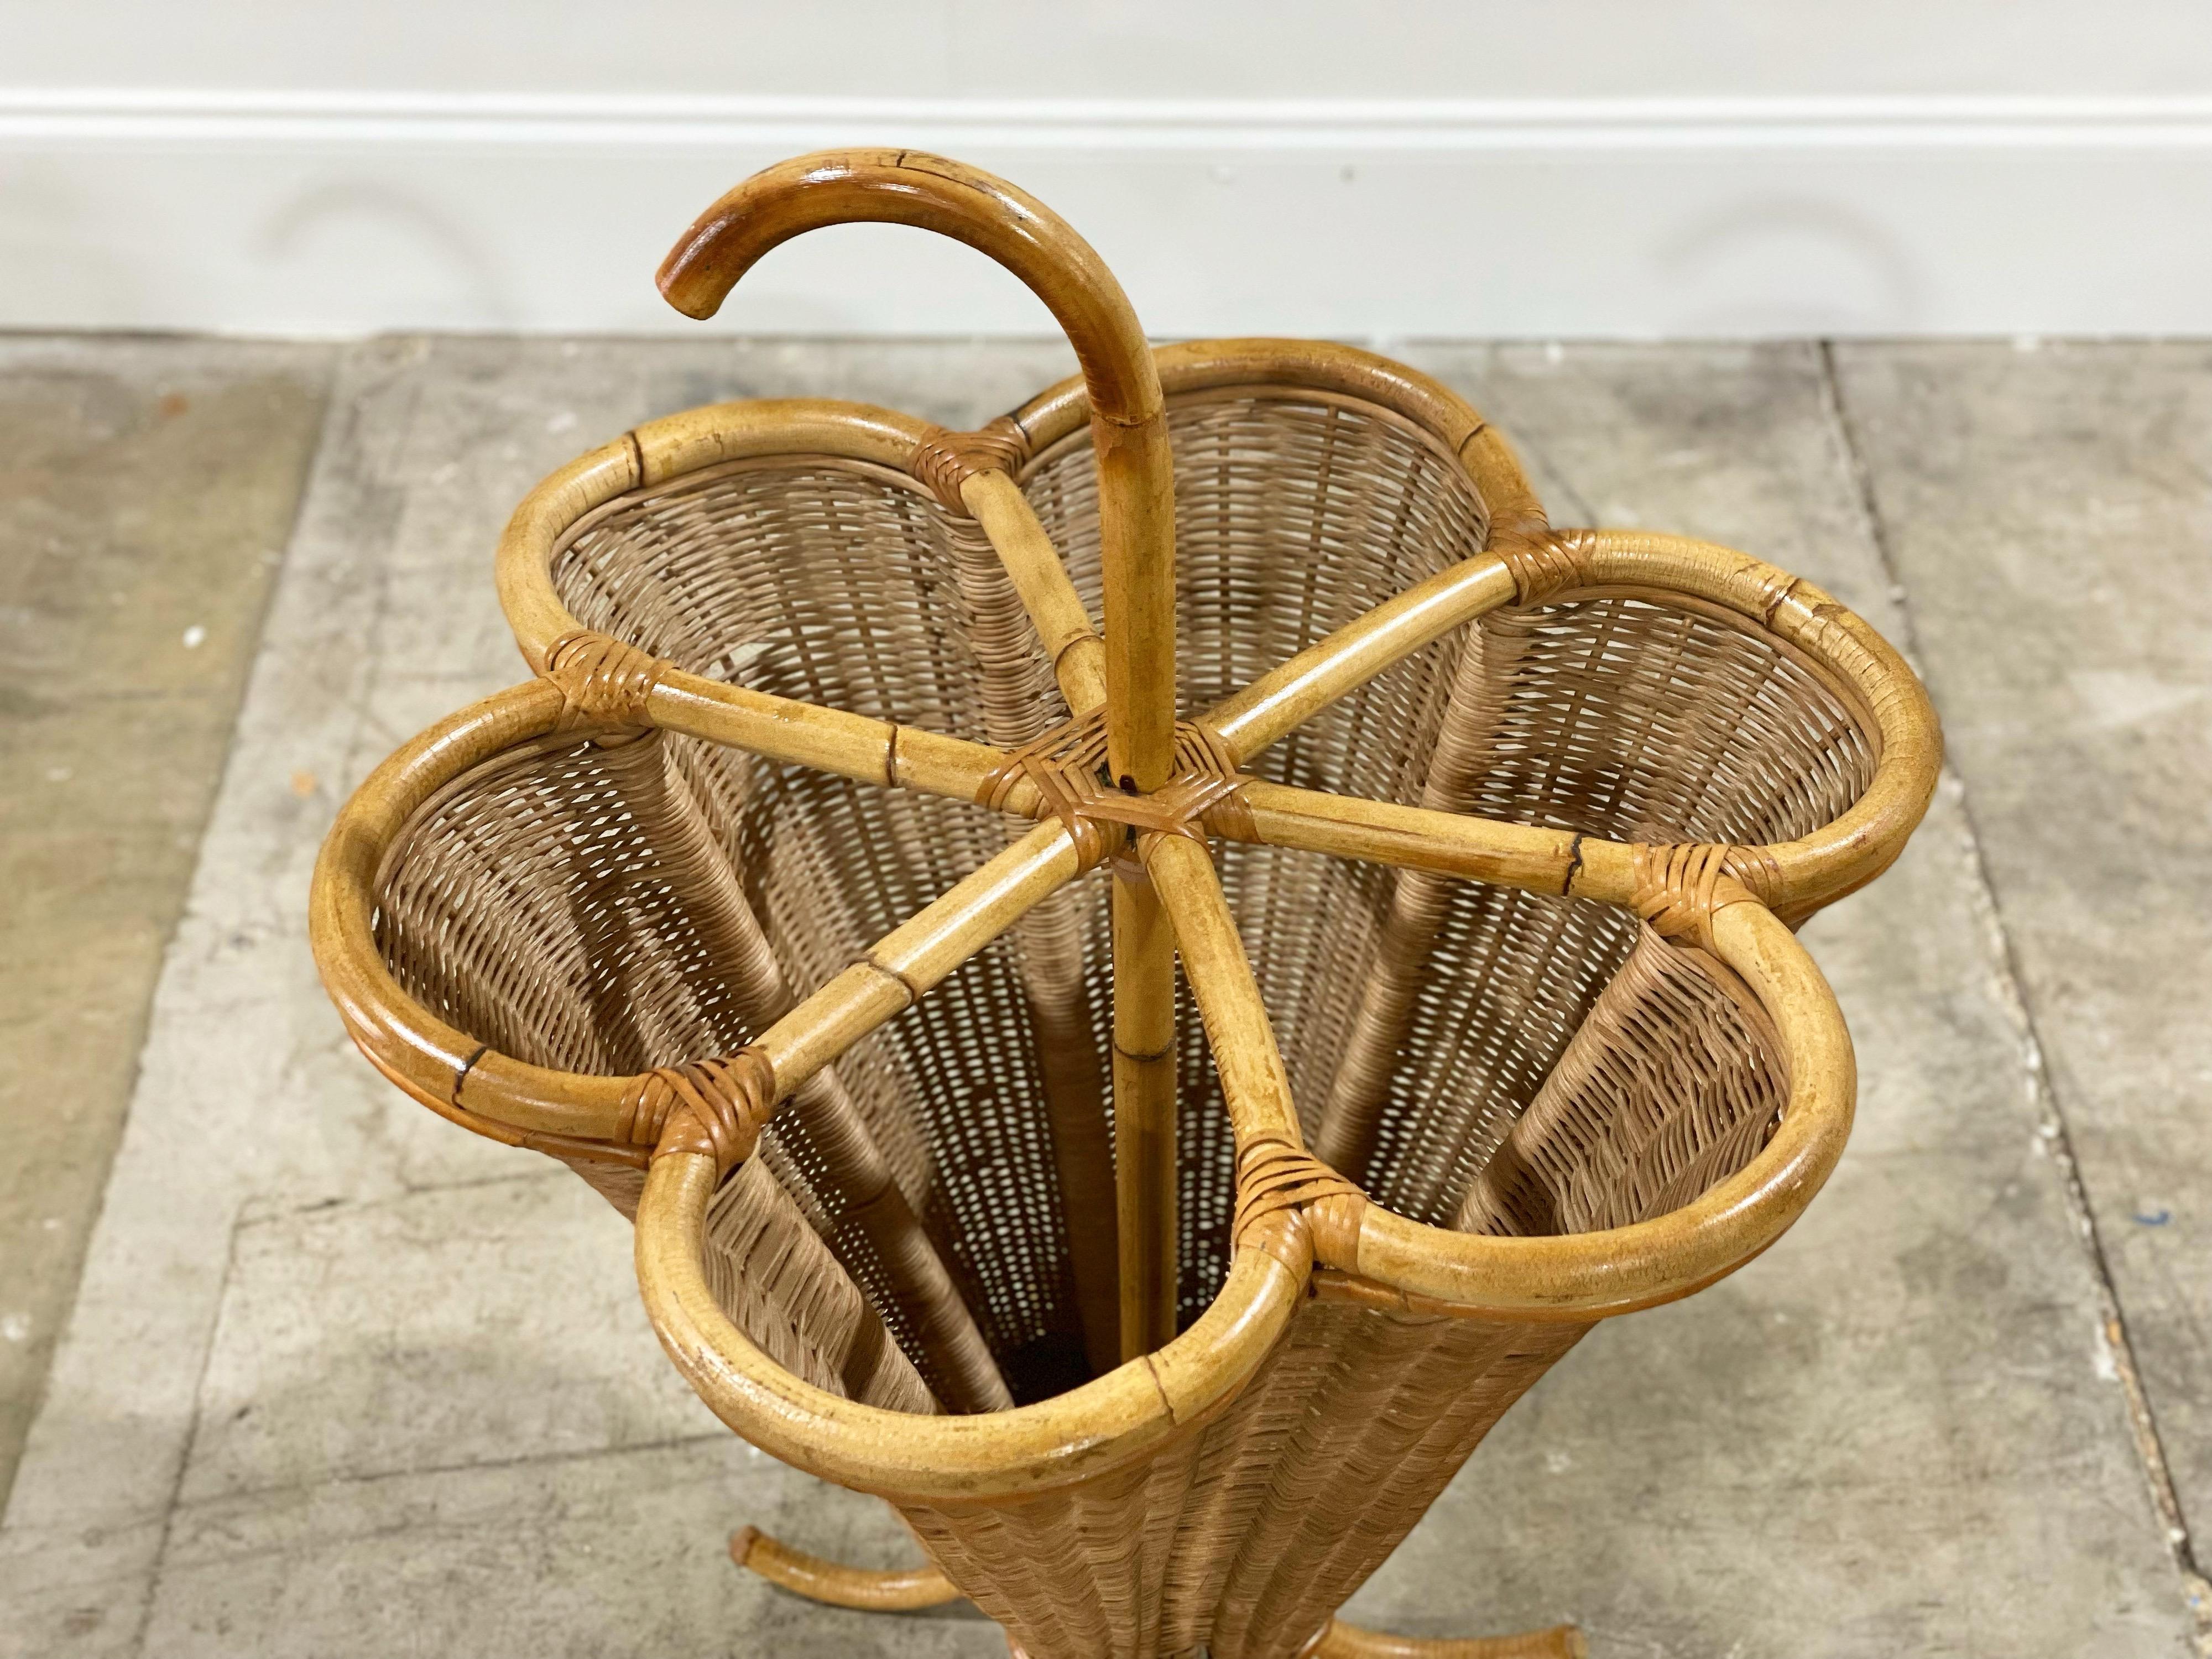 Vintage Midcentury Rattan Wicker Umbrella Stand, France circa 1960s In Good Condition For Sale In Framingham, MA